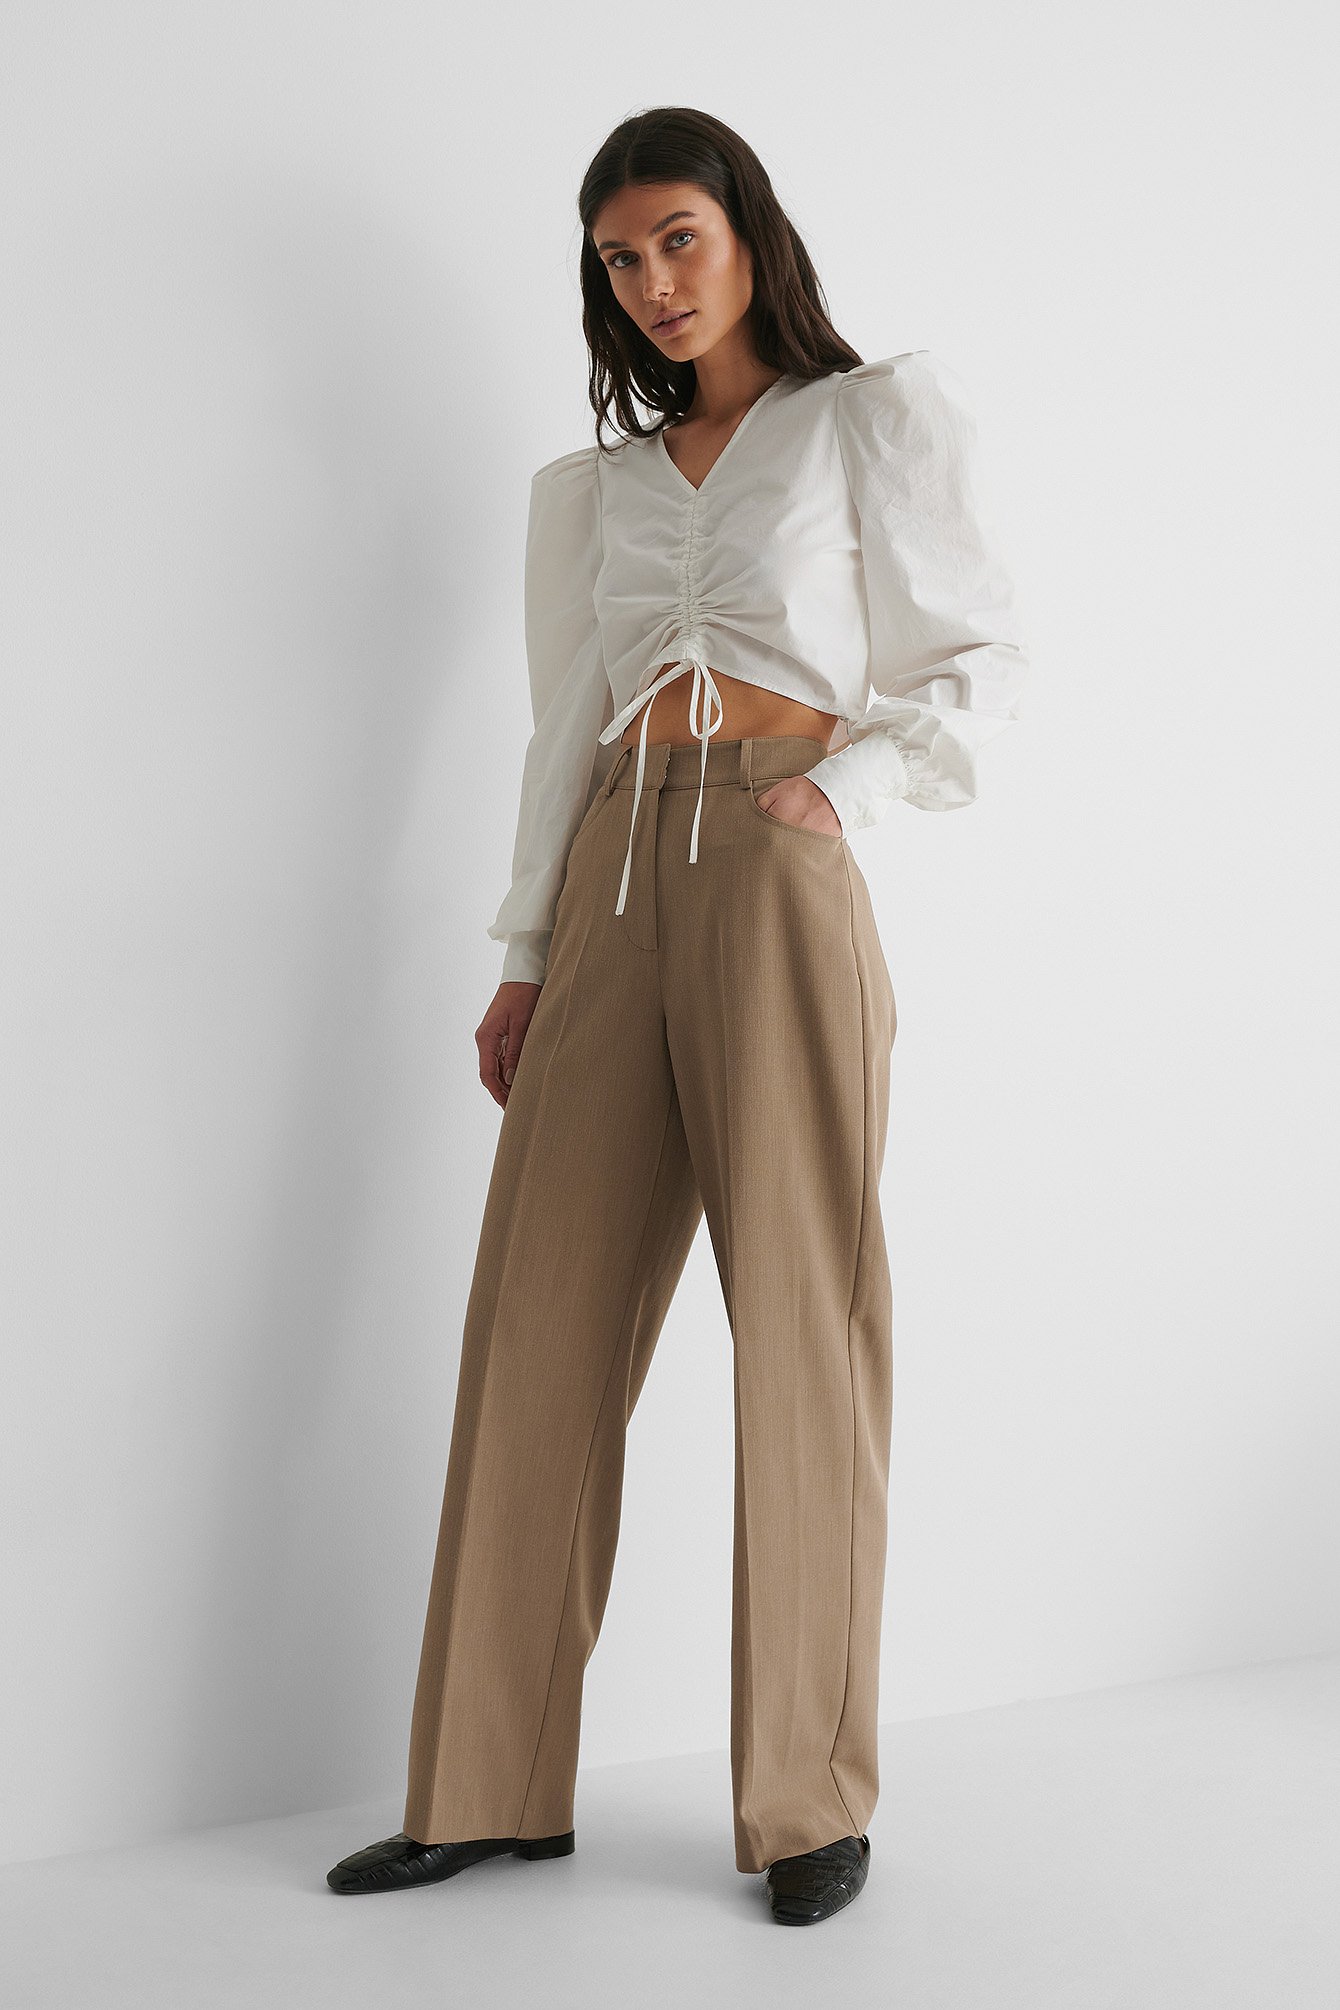 Cotton Drawstring Top with Suit Pants and Loafers.